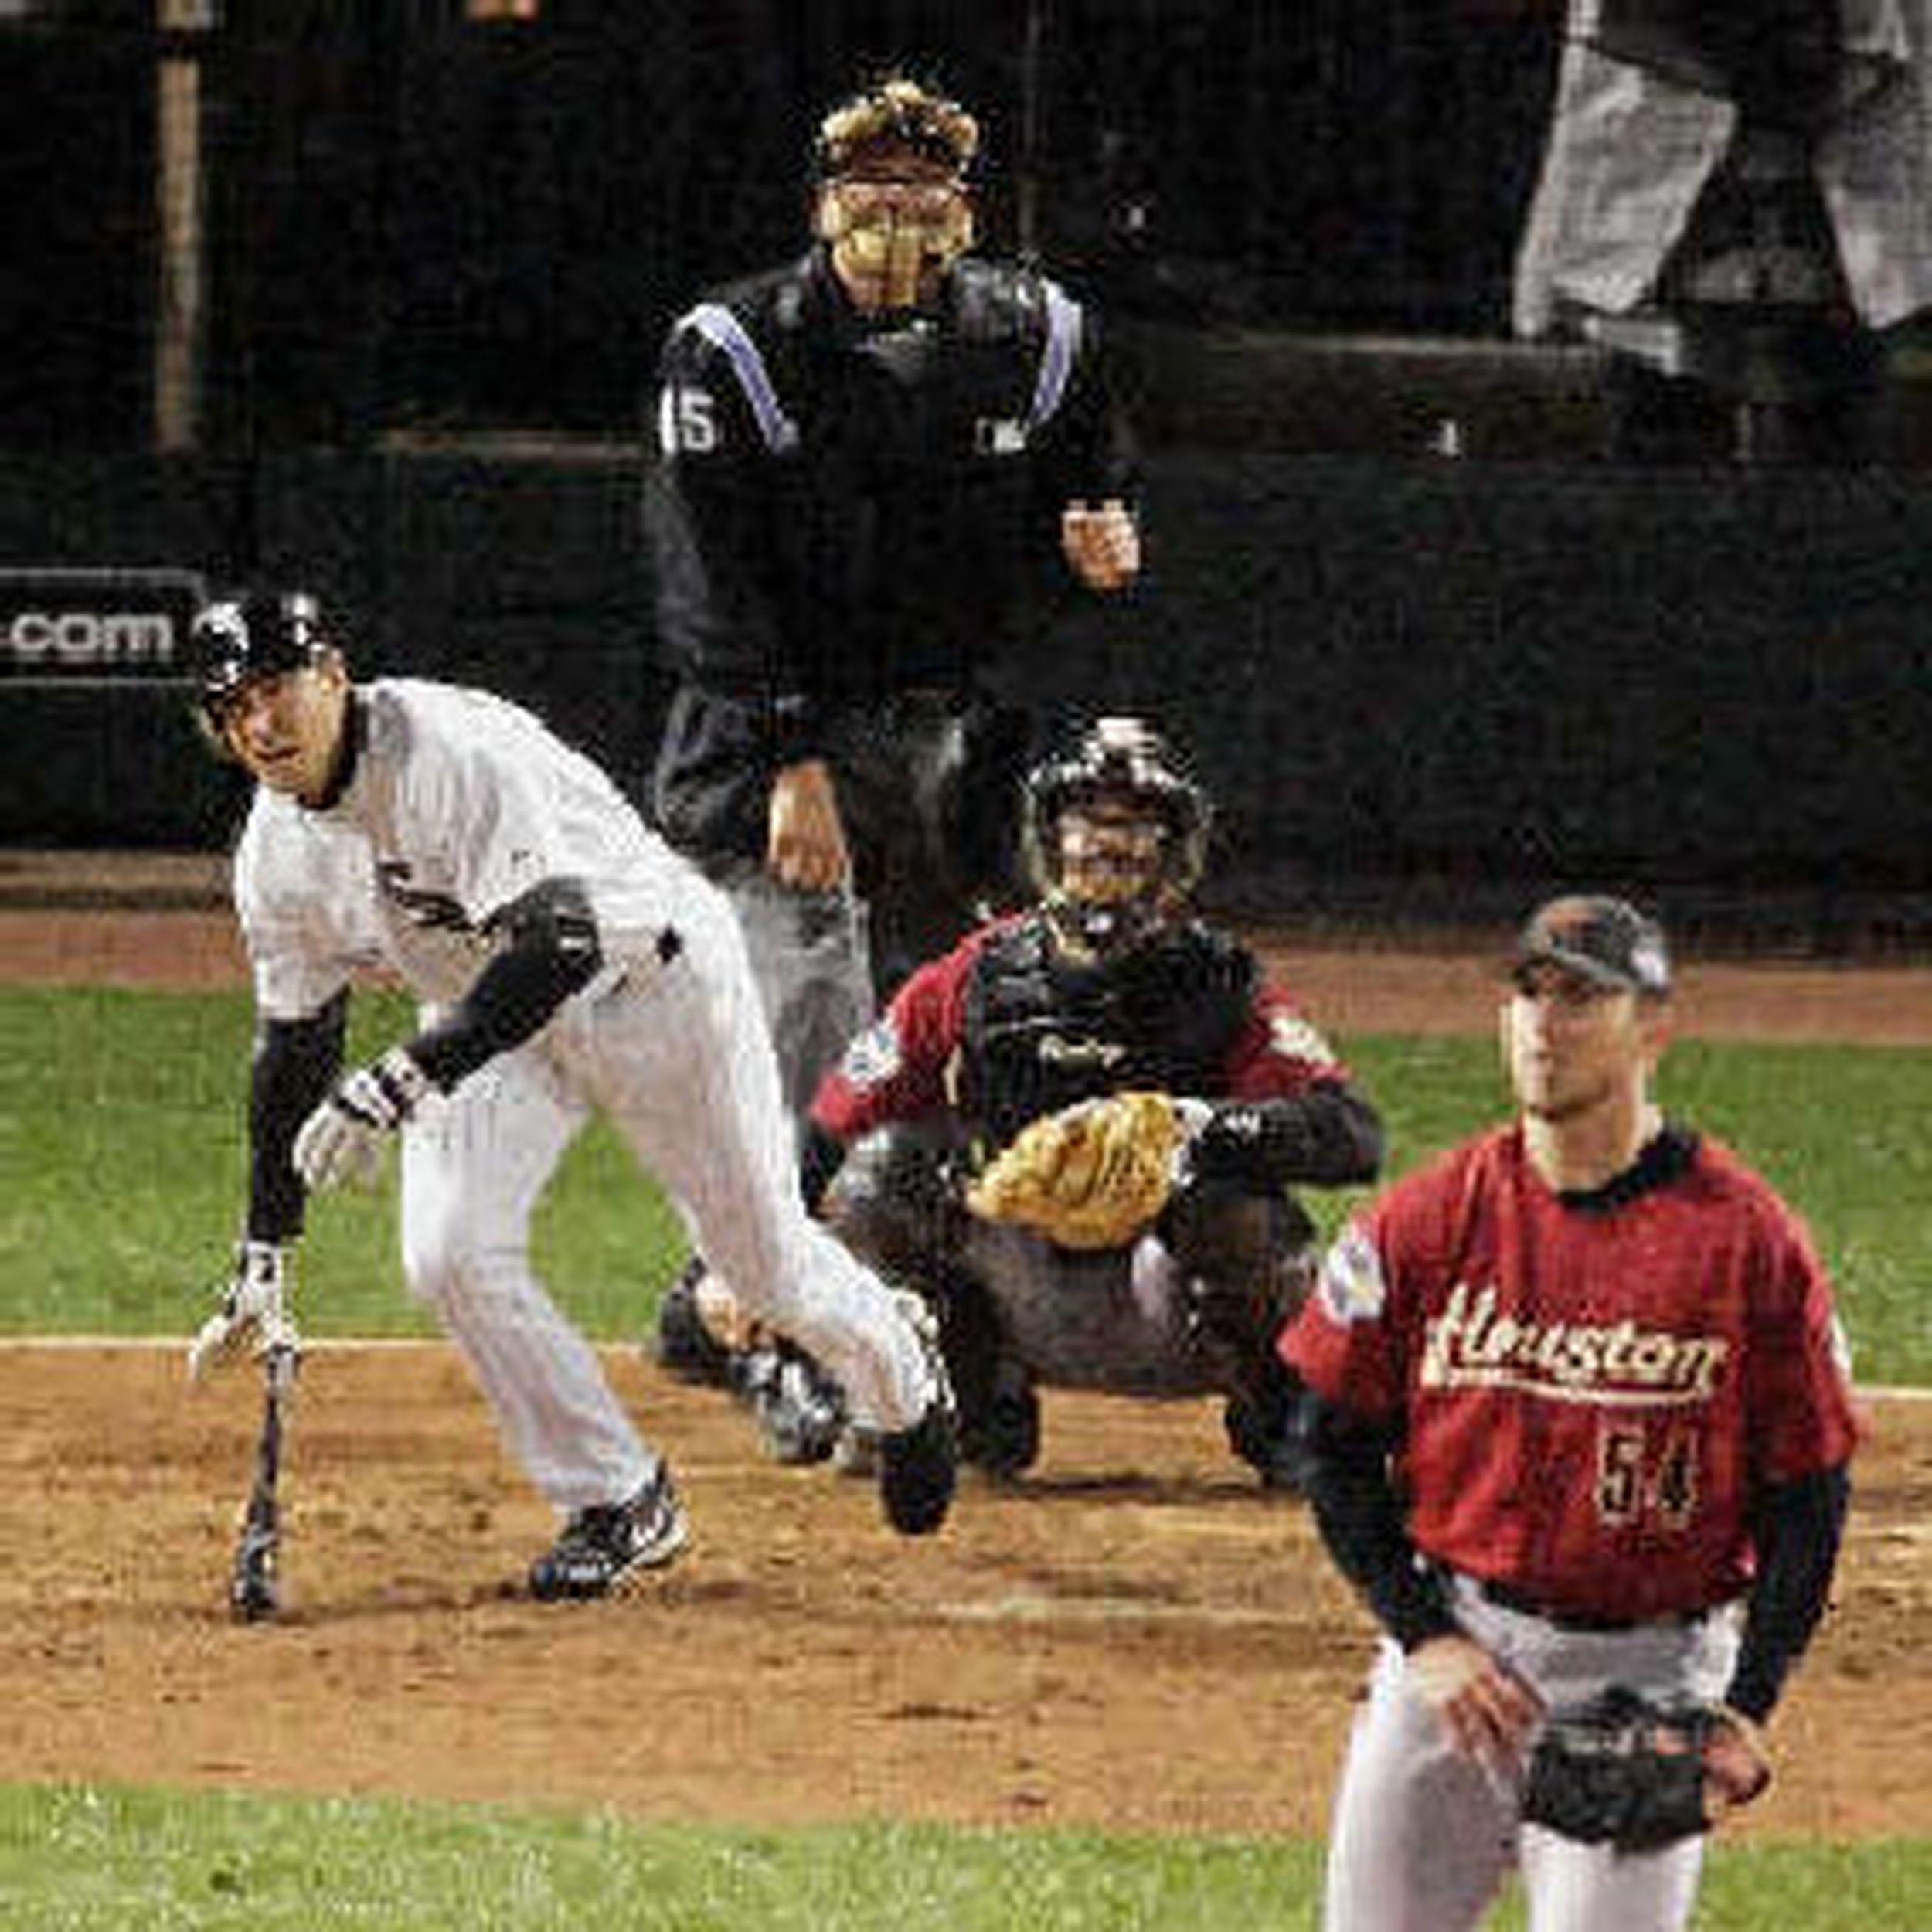 Podsednik's home run carries day